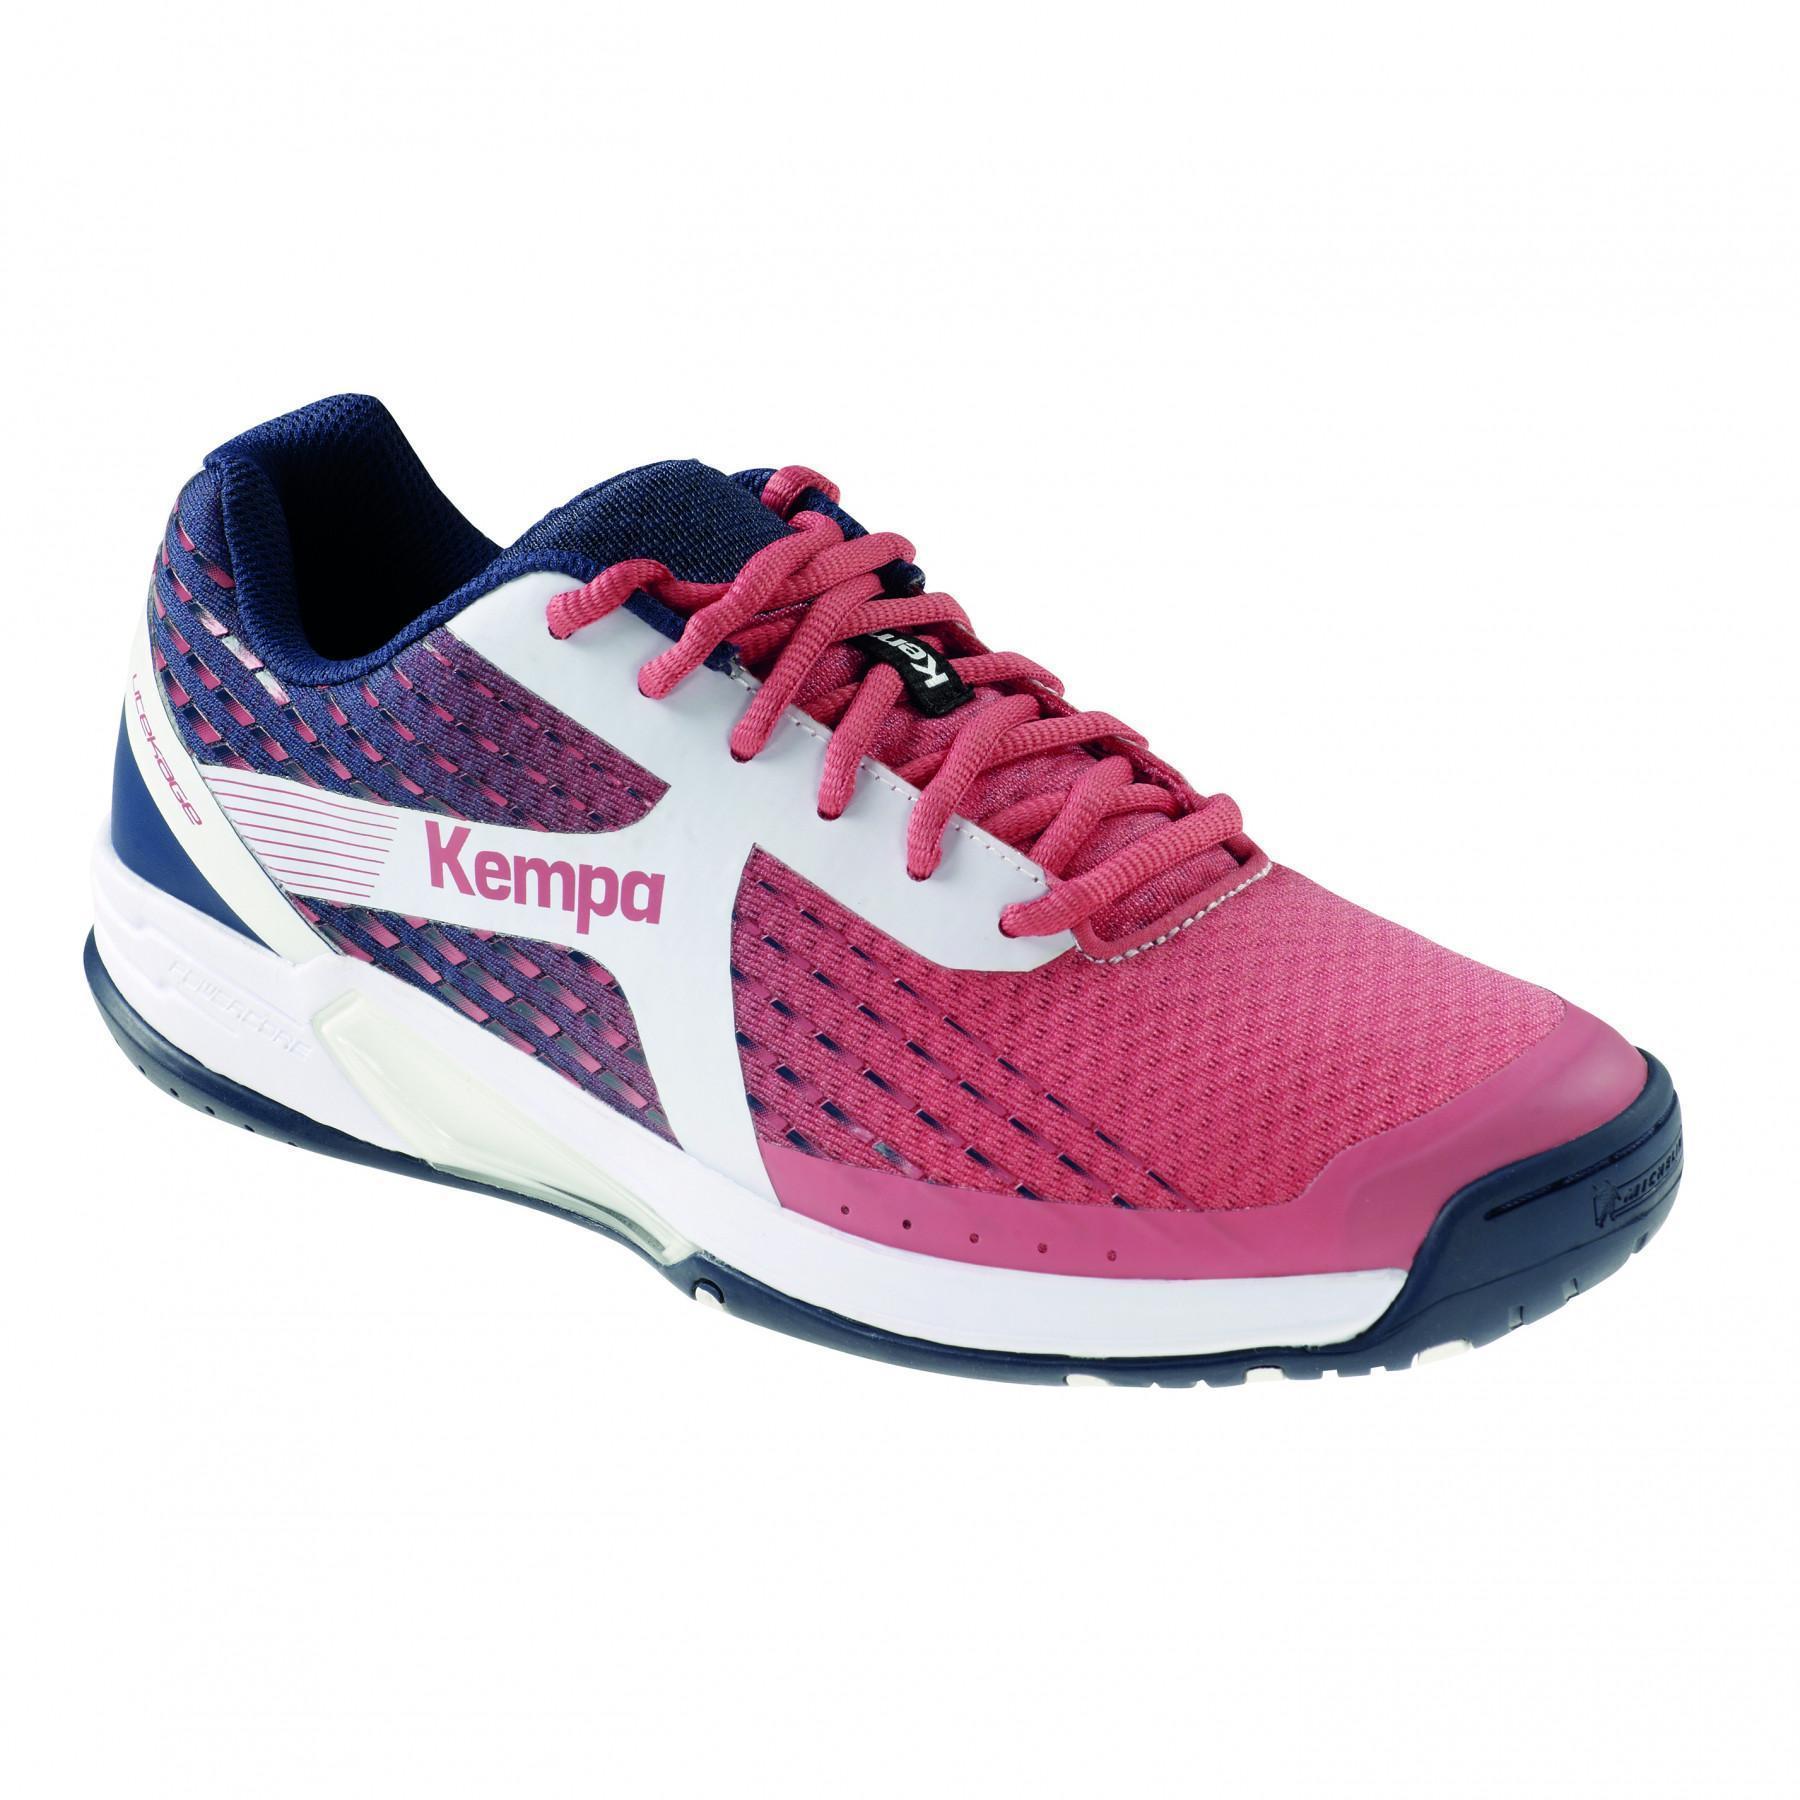 Chaussures femme Kempa Wing